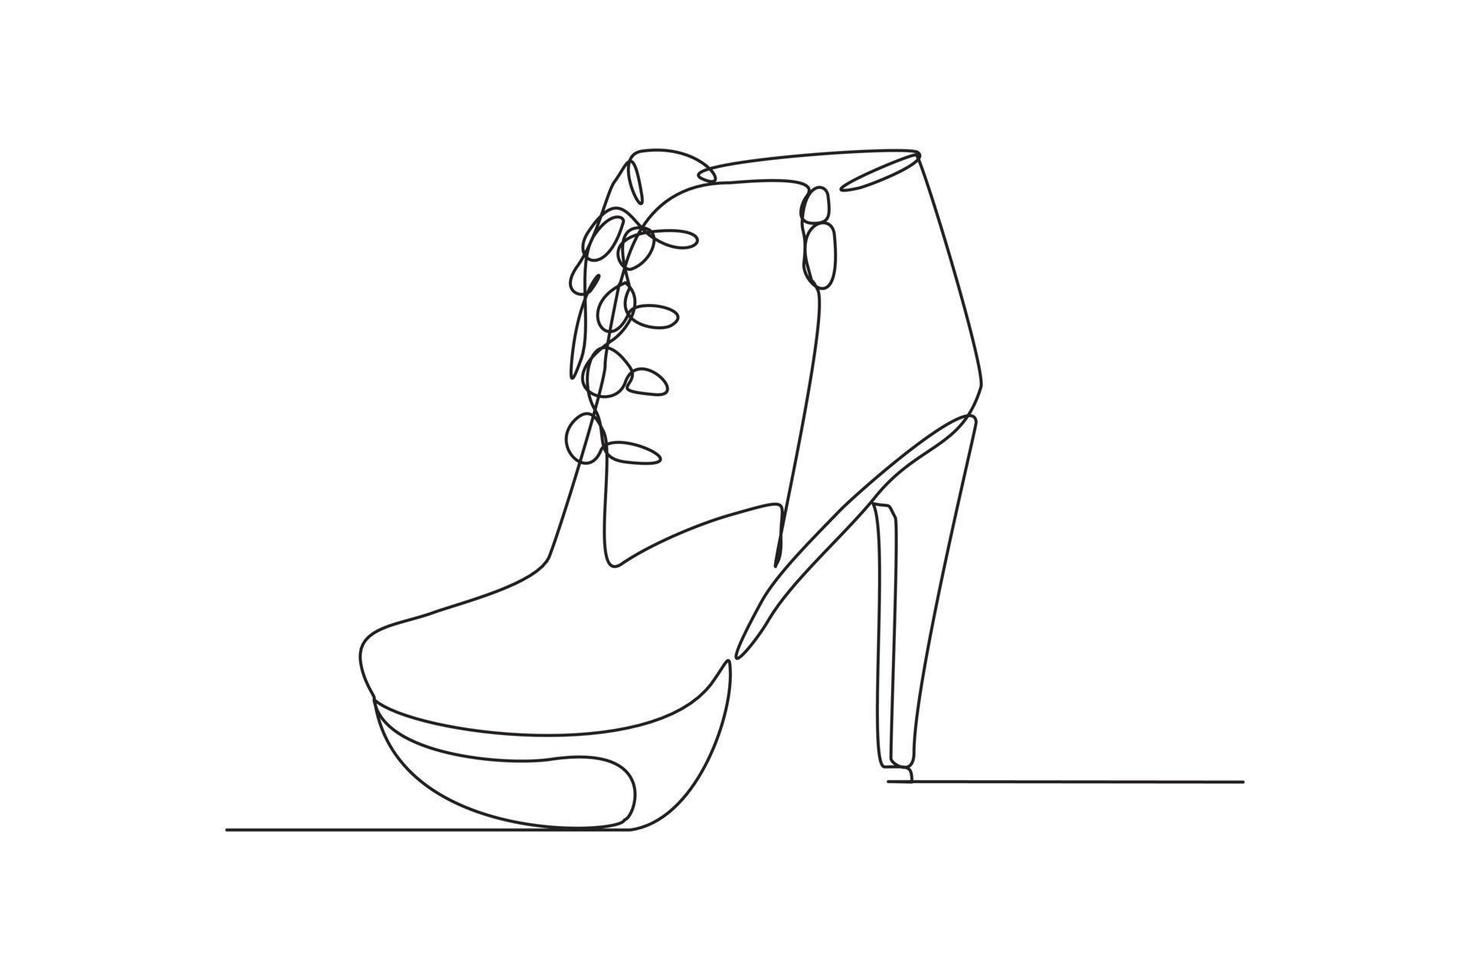 Continuous line drawing of women boots with heels. Single one line woman shoes art. Vector illustration